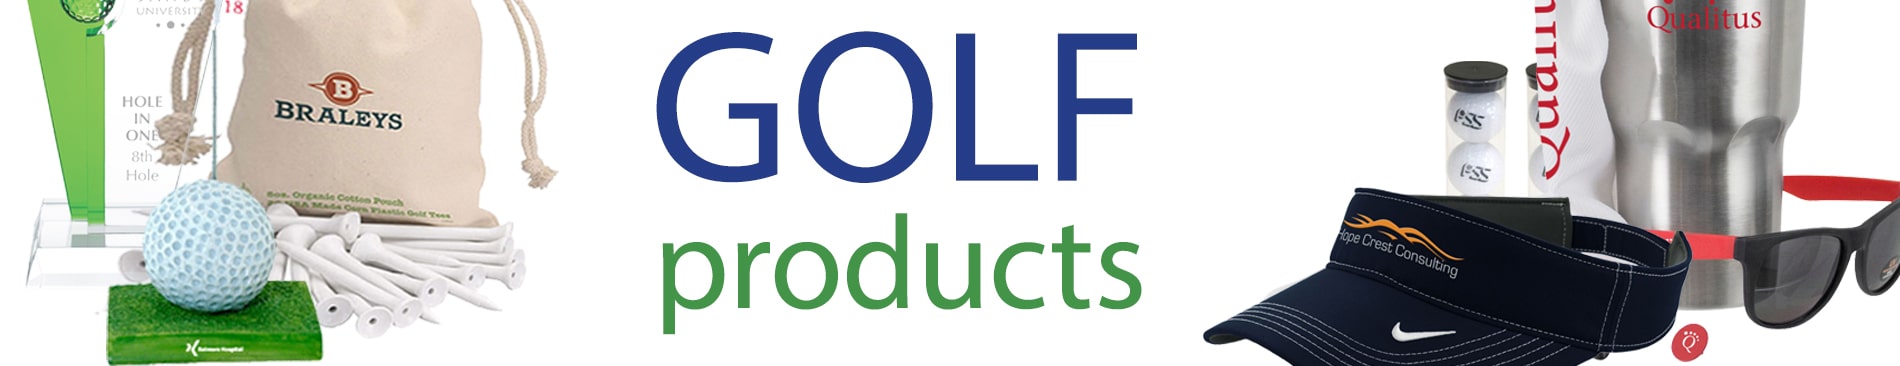 golf promotional items